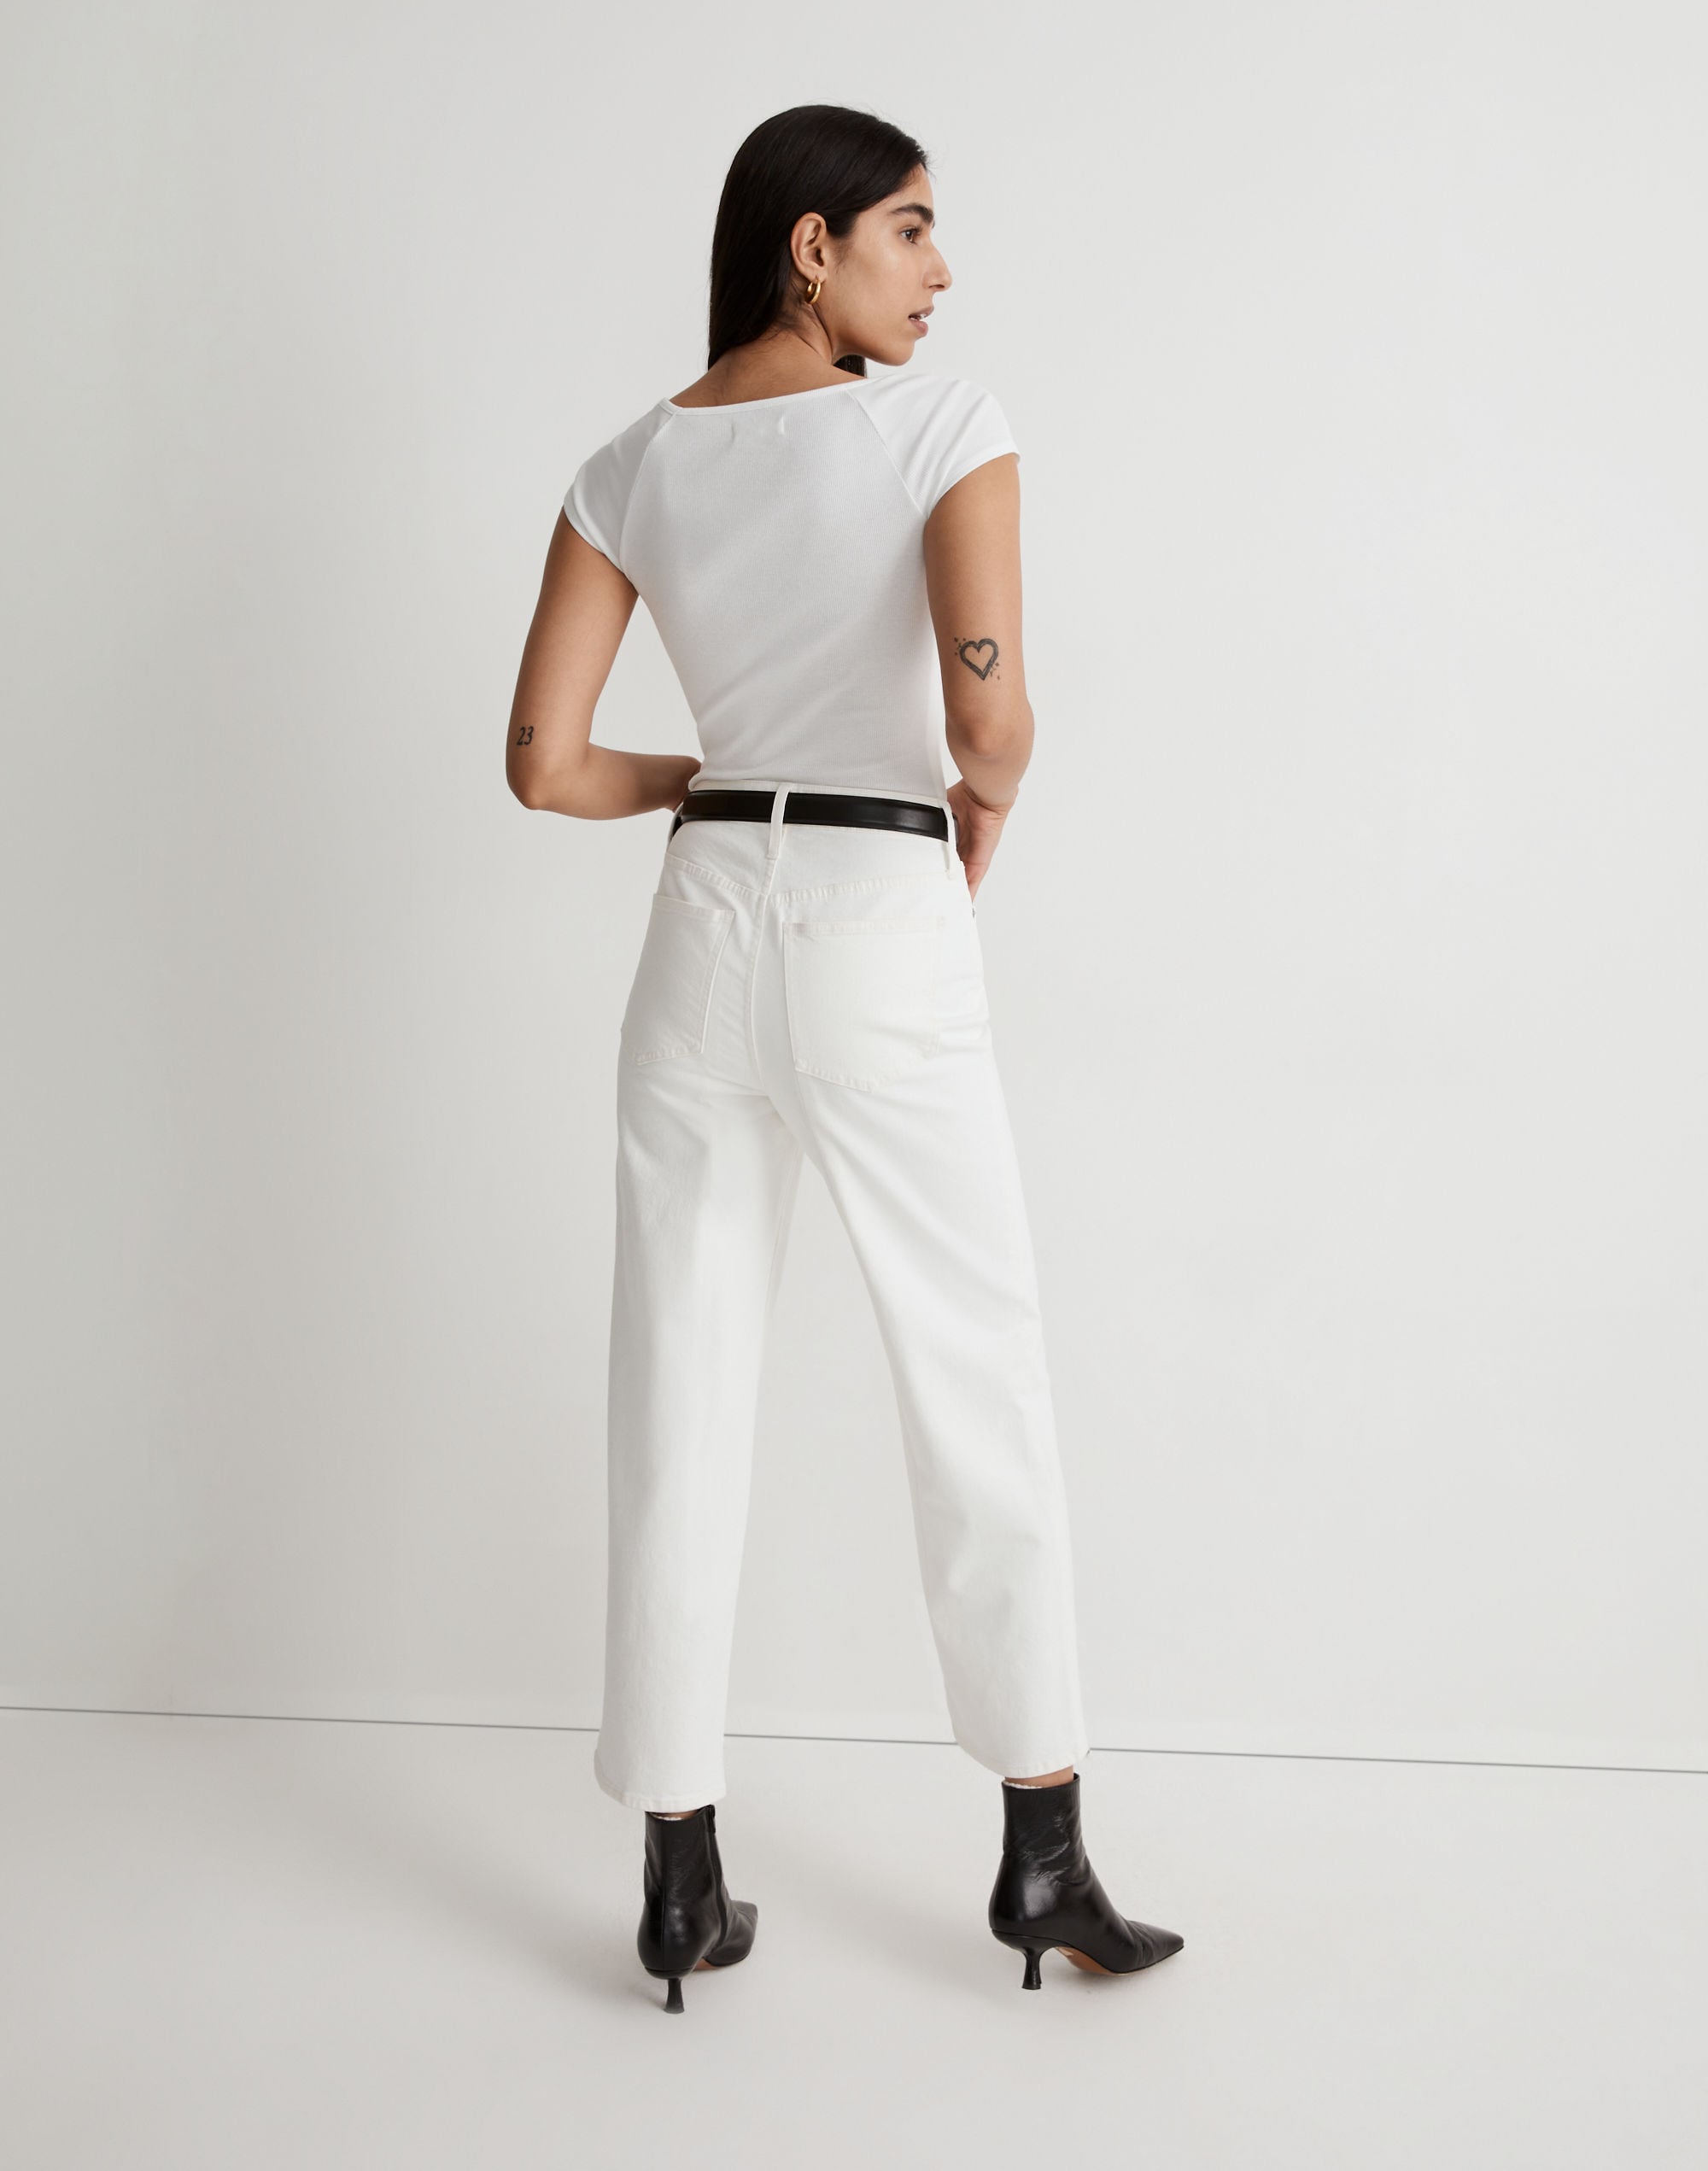 The Tall Perfect Vintage Wide-Leg Crop Jean Tile White